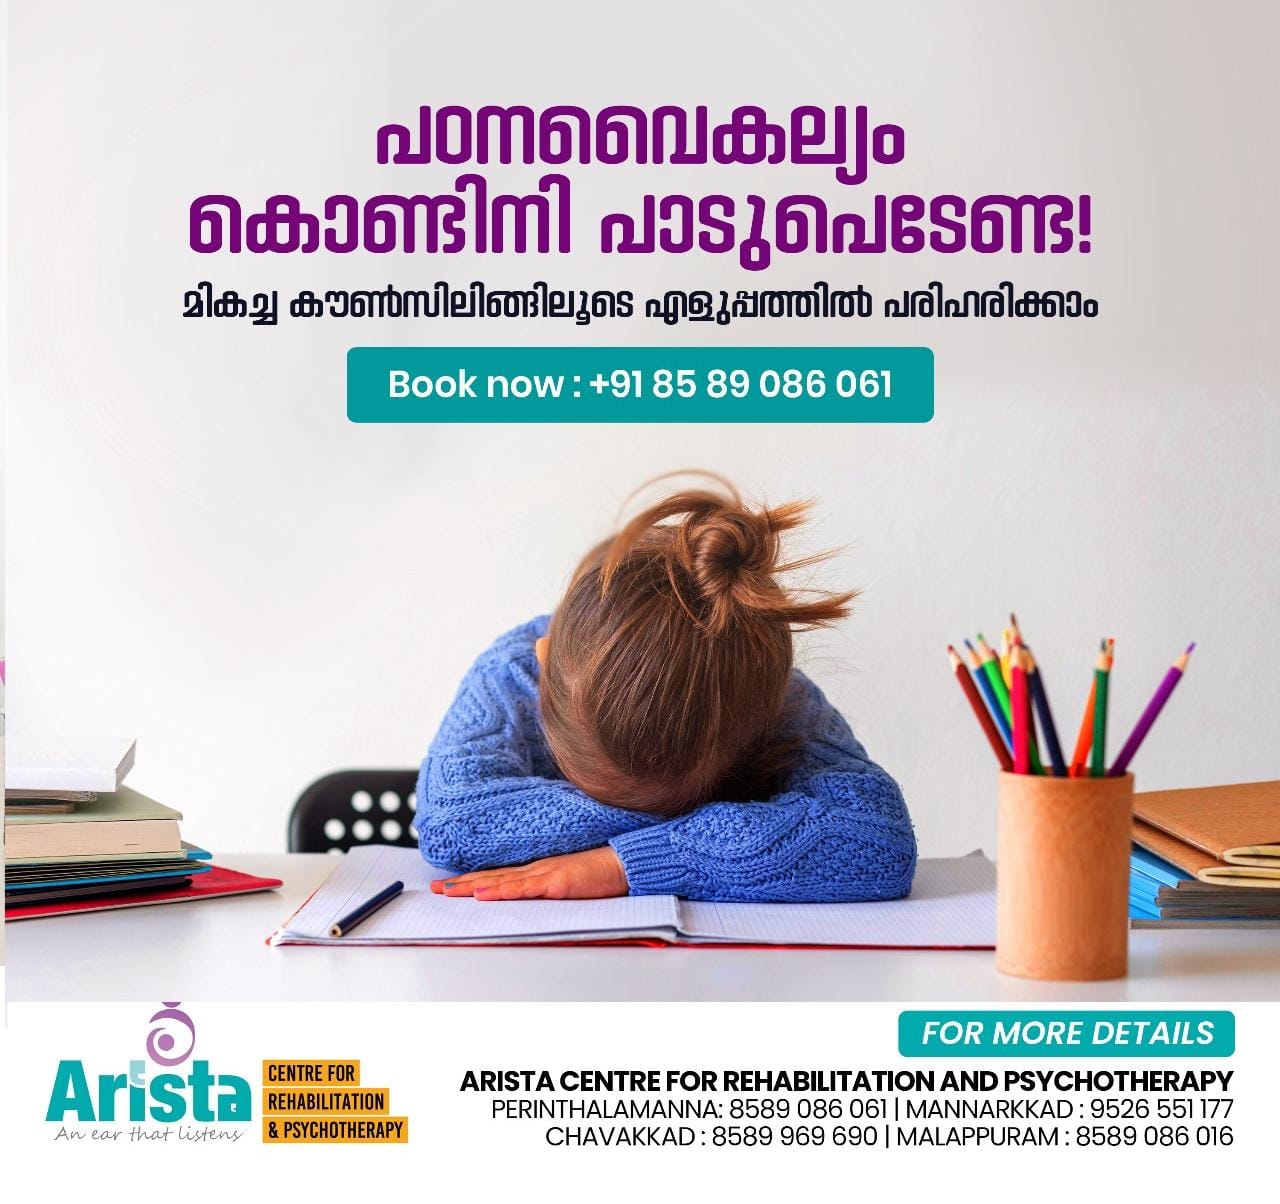 Arista Centre For Rehabilitation & Psychotherapy